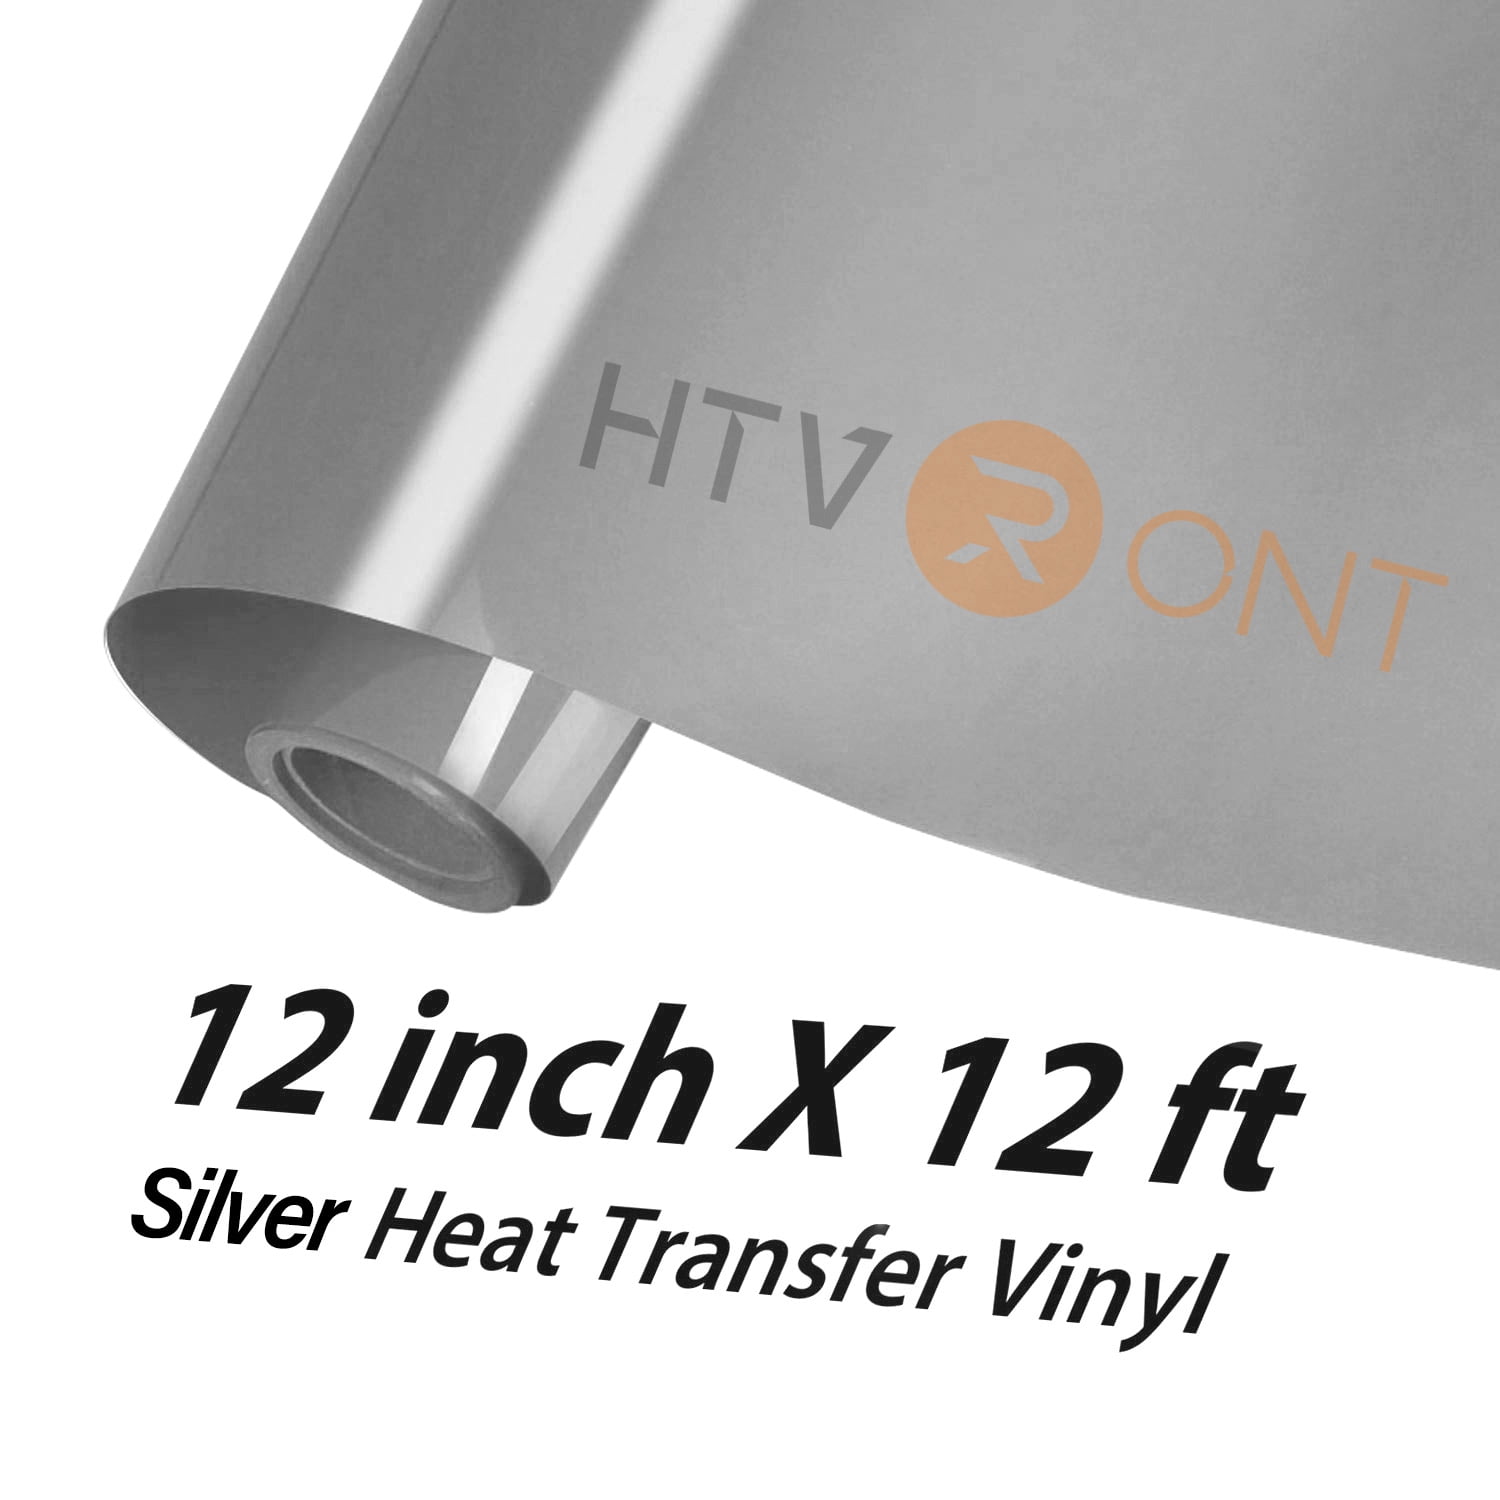  HTVRONT White Iron on Vinyl Roll - 12 x 12ft White Heat  Transfer Vinyl, Heavy Duty White HTV Vinyl Roll for T-Shirts Clothing, Easy  to Cut & Weed : Arts, Crafts